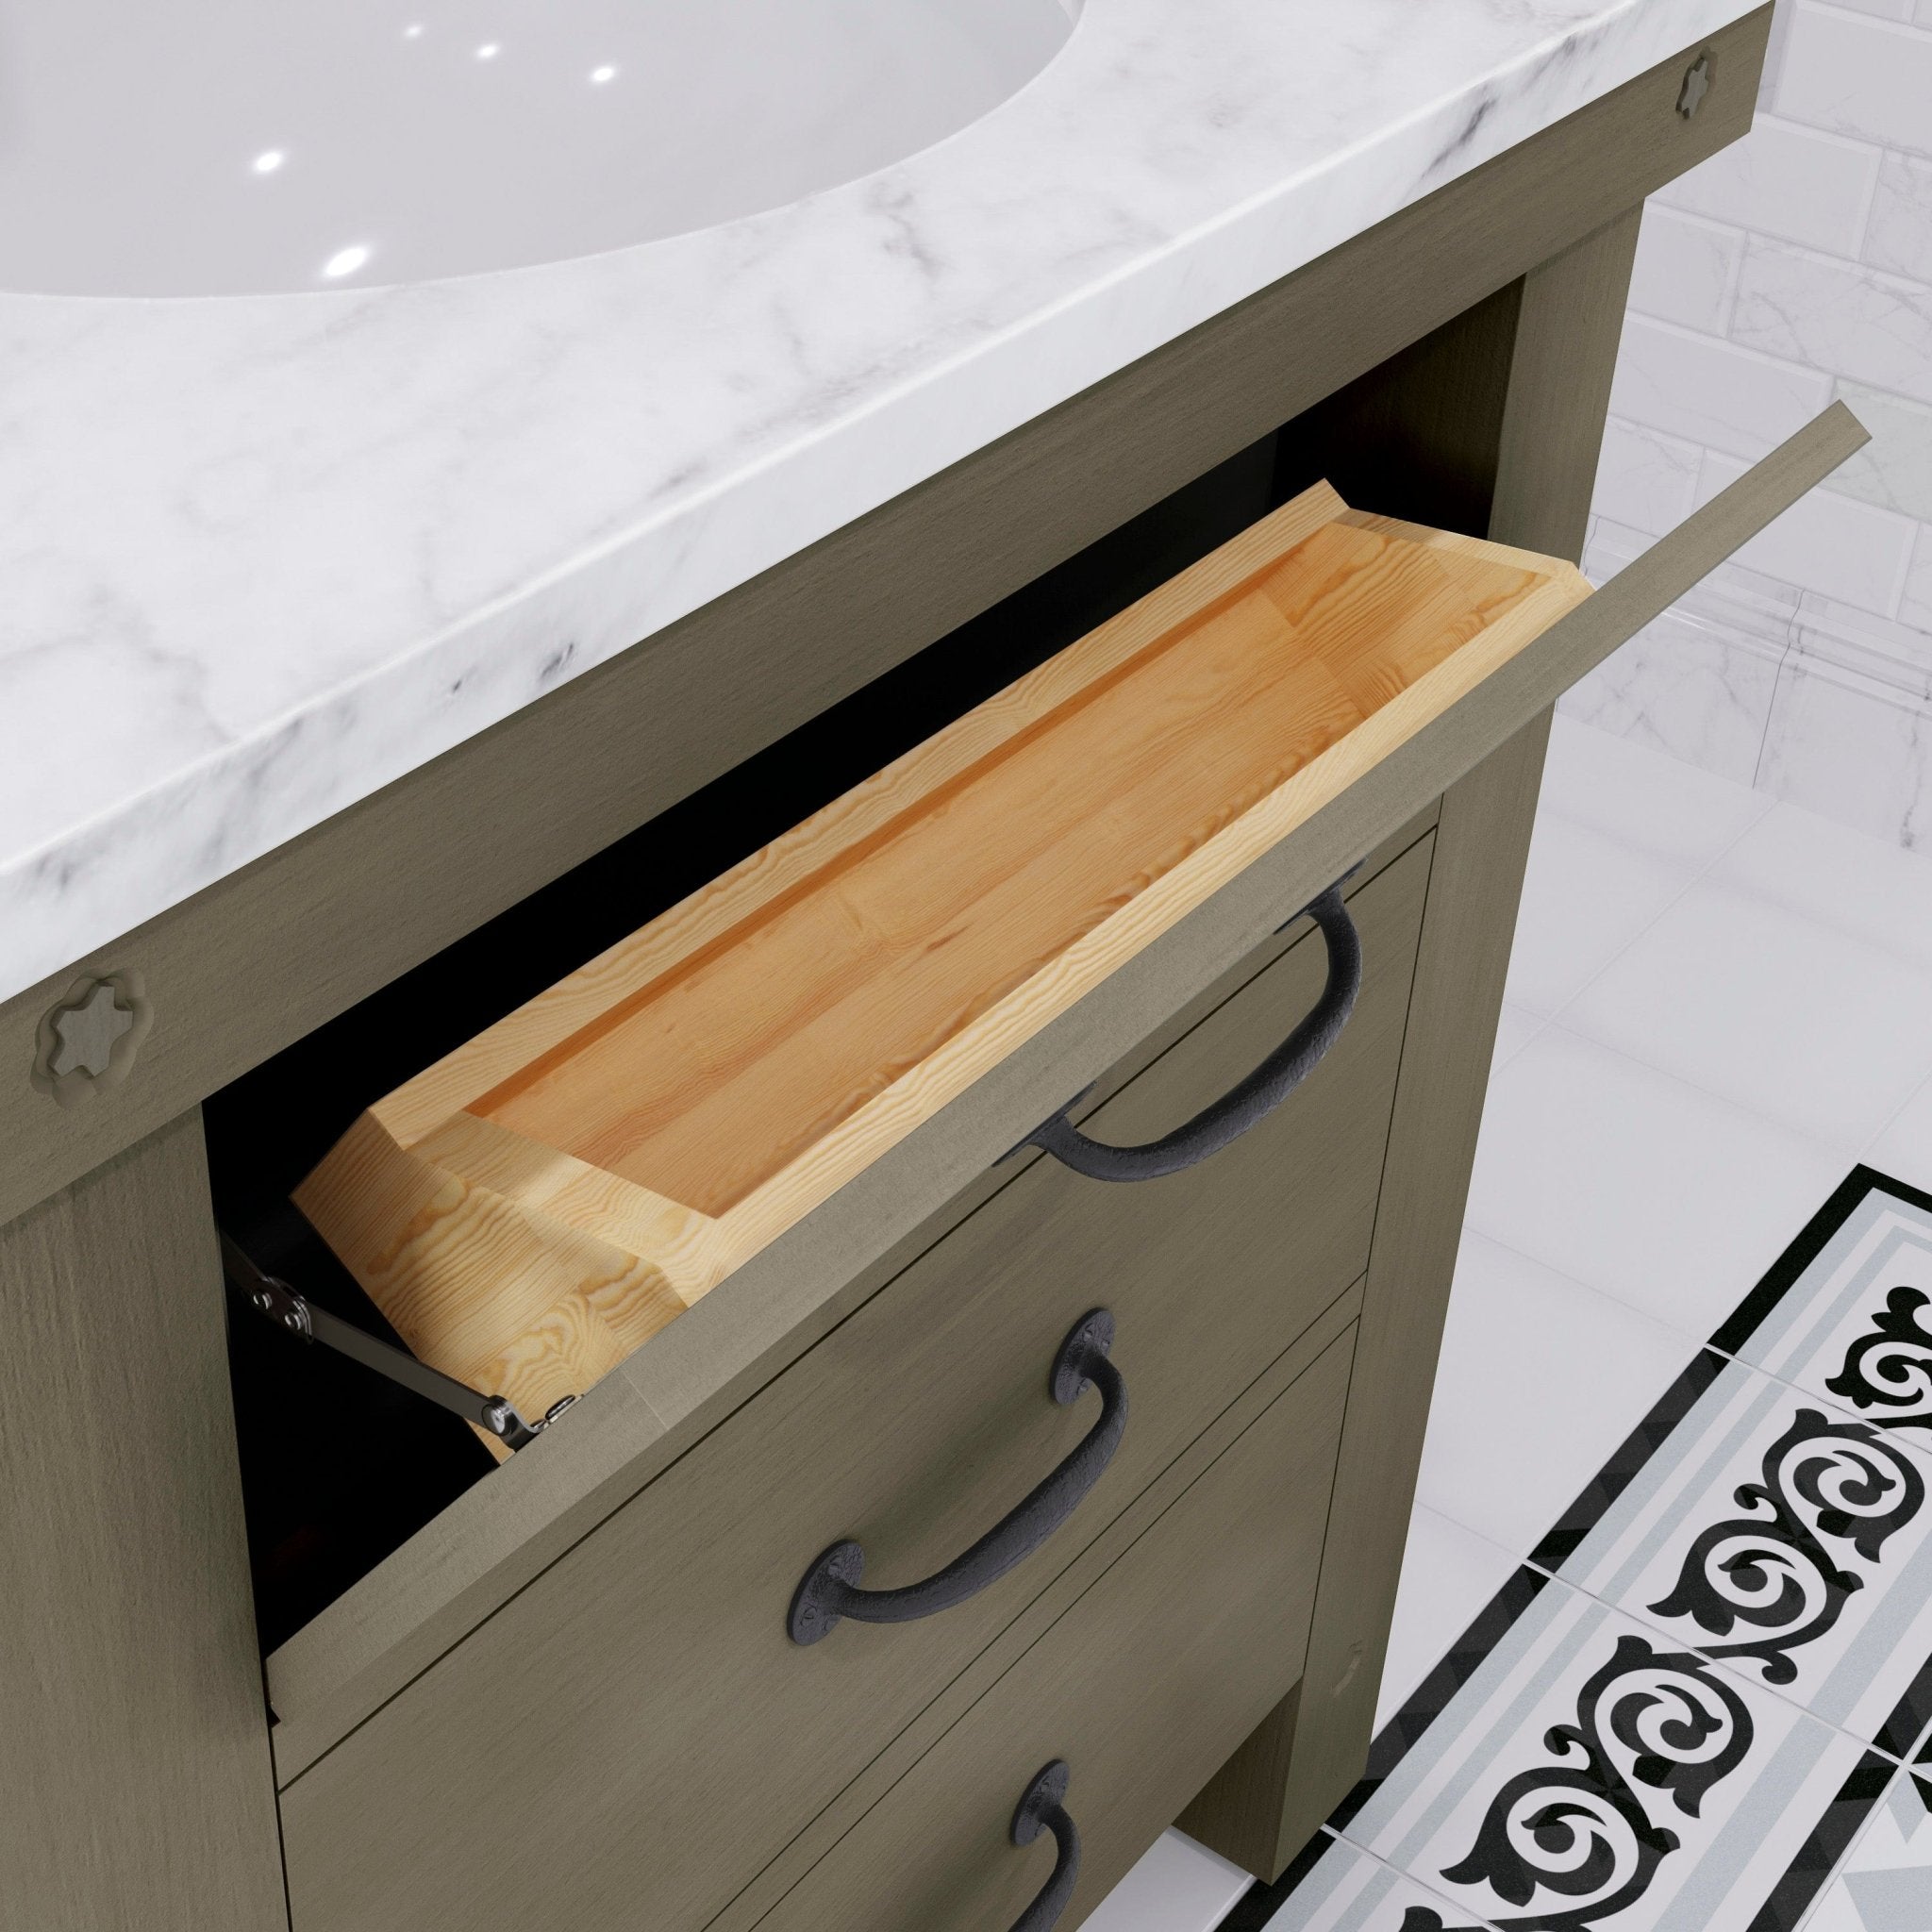 30 Inch Grizzle Grey Single Sink Bathroom Vanity With Mirror With Carrara White Marble Counter Top From The ABERDEEN Collection - Molaix732030749641Bathroom VanitiesAB30CW03GG-A24000000